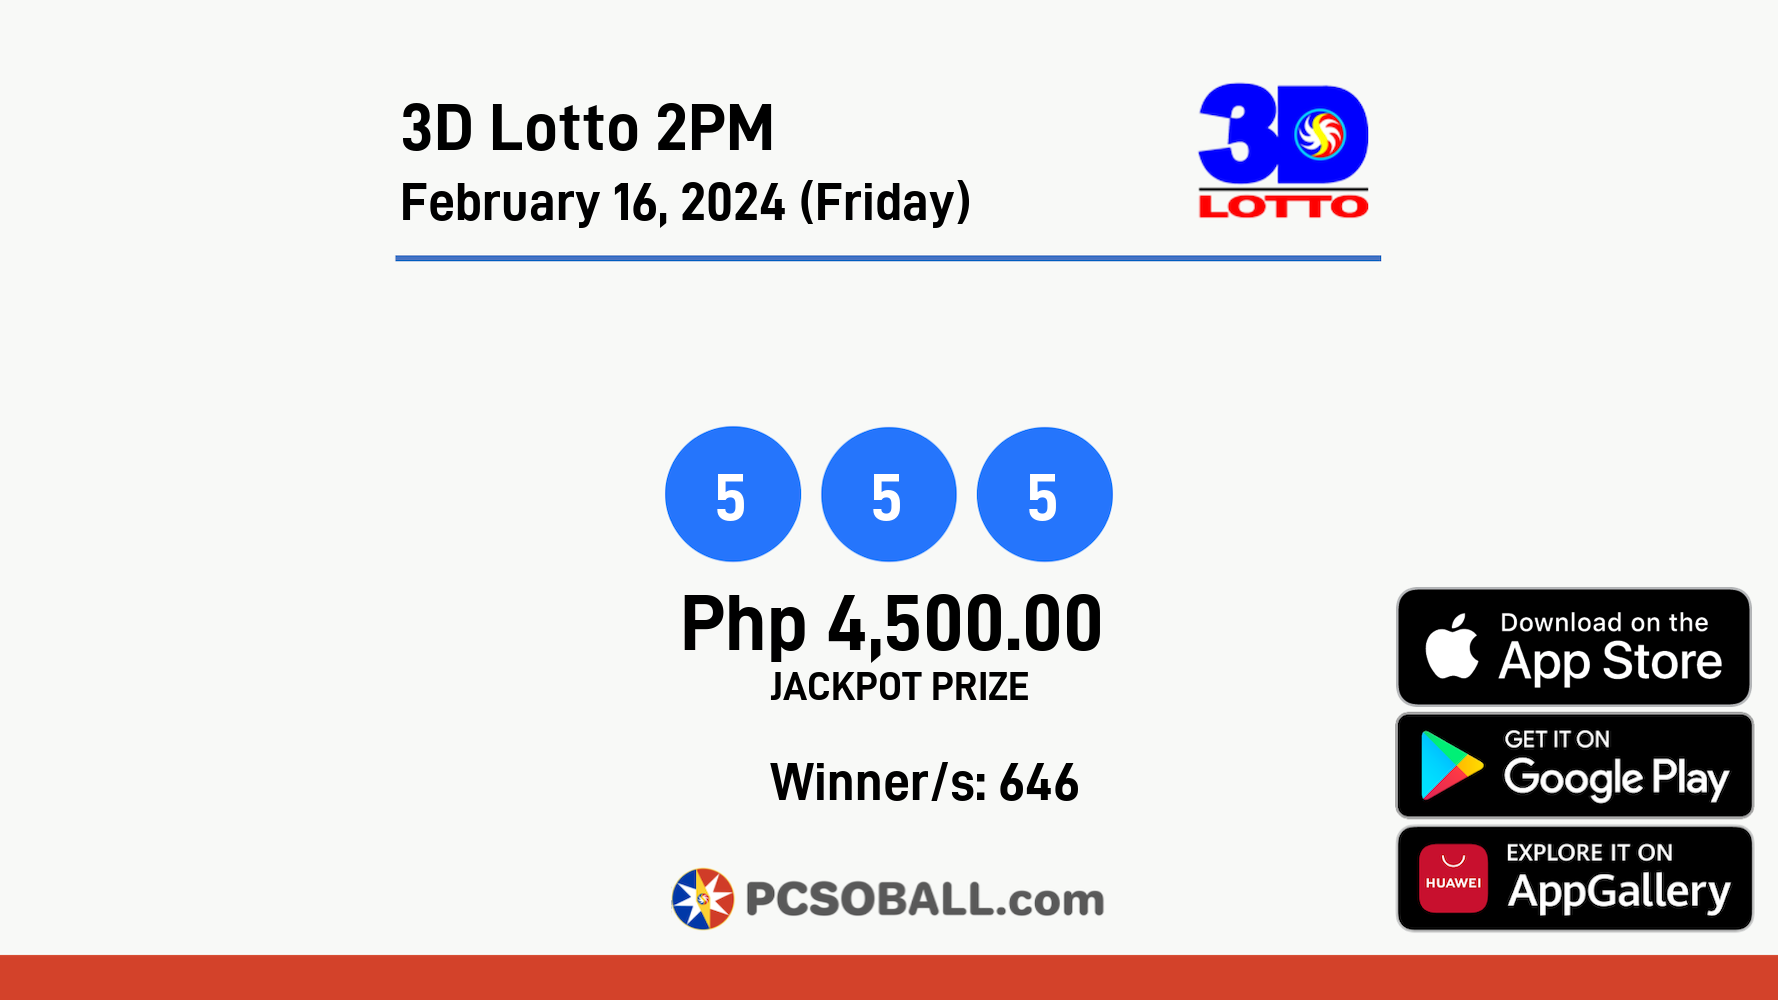 3D Lotto 2PM February 16, 2024 (Friday) Result